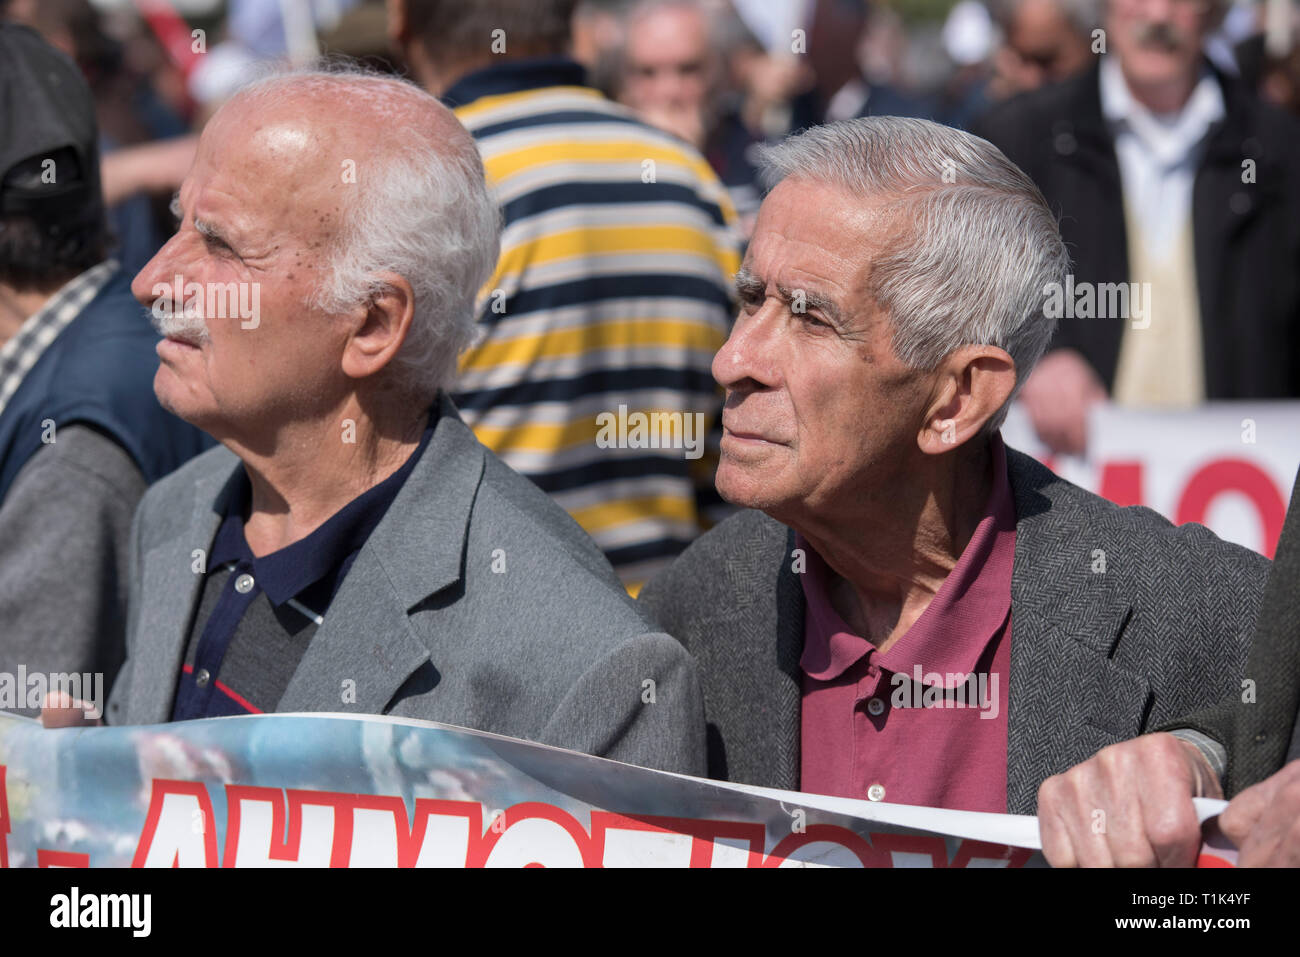 Athens, Greece. 27th Mar 2019. Protesters attend speeches by pensioners' unionists as they prepare to march to the prime minister's office at Maximos Mansion. Pensioners' unions took to the streets to protest over pension cuts and fiscal policies and demand return of their slashed pensions, as their income has been shrinking since Greece entered the bailout deals in 2010. Credit: Nikolas Georgiou/Alamy Live News Stock Photo